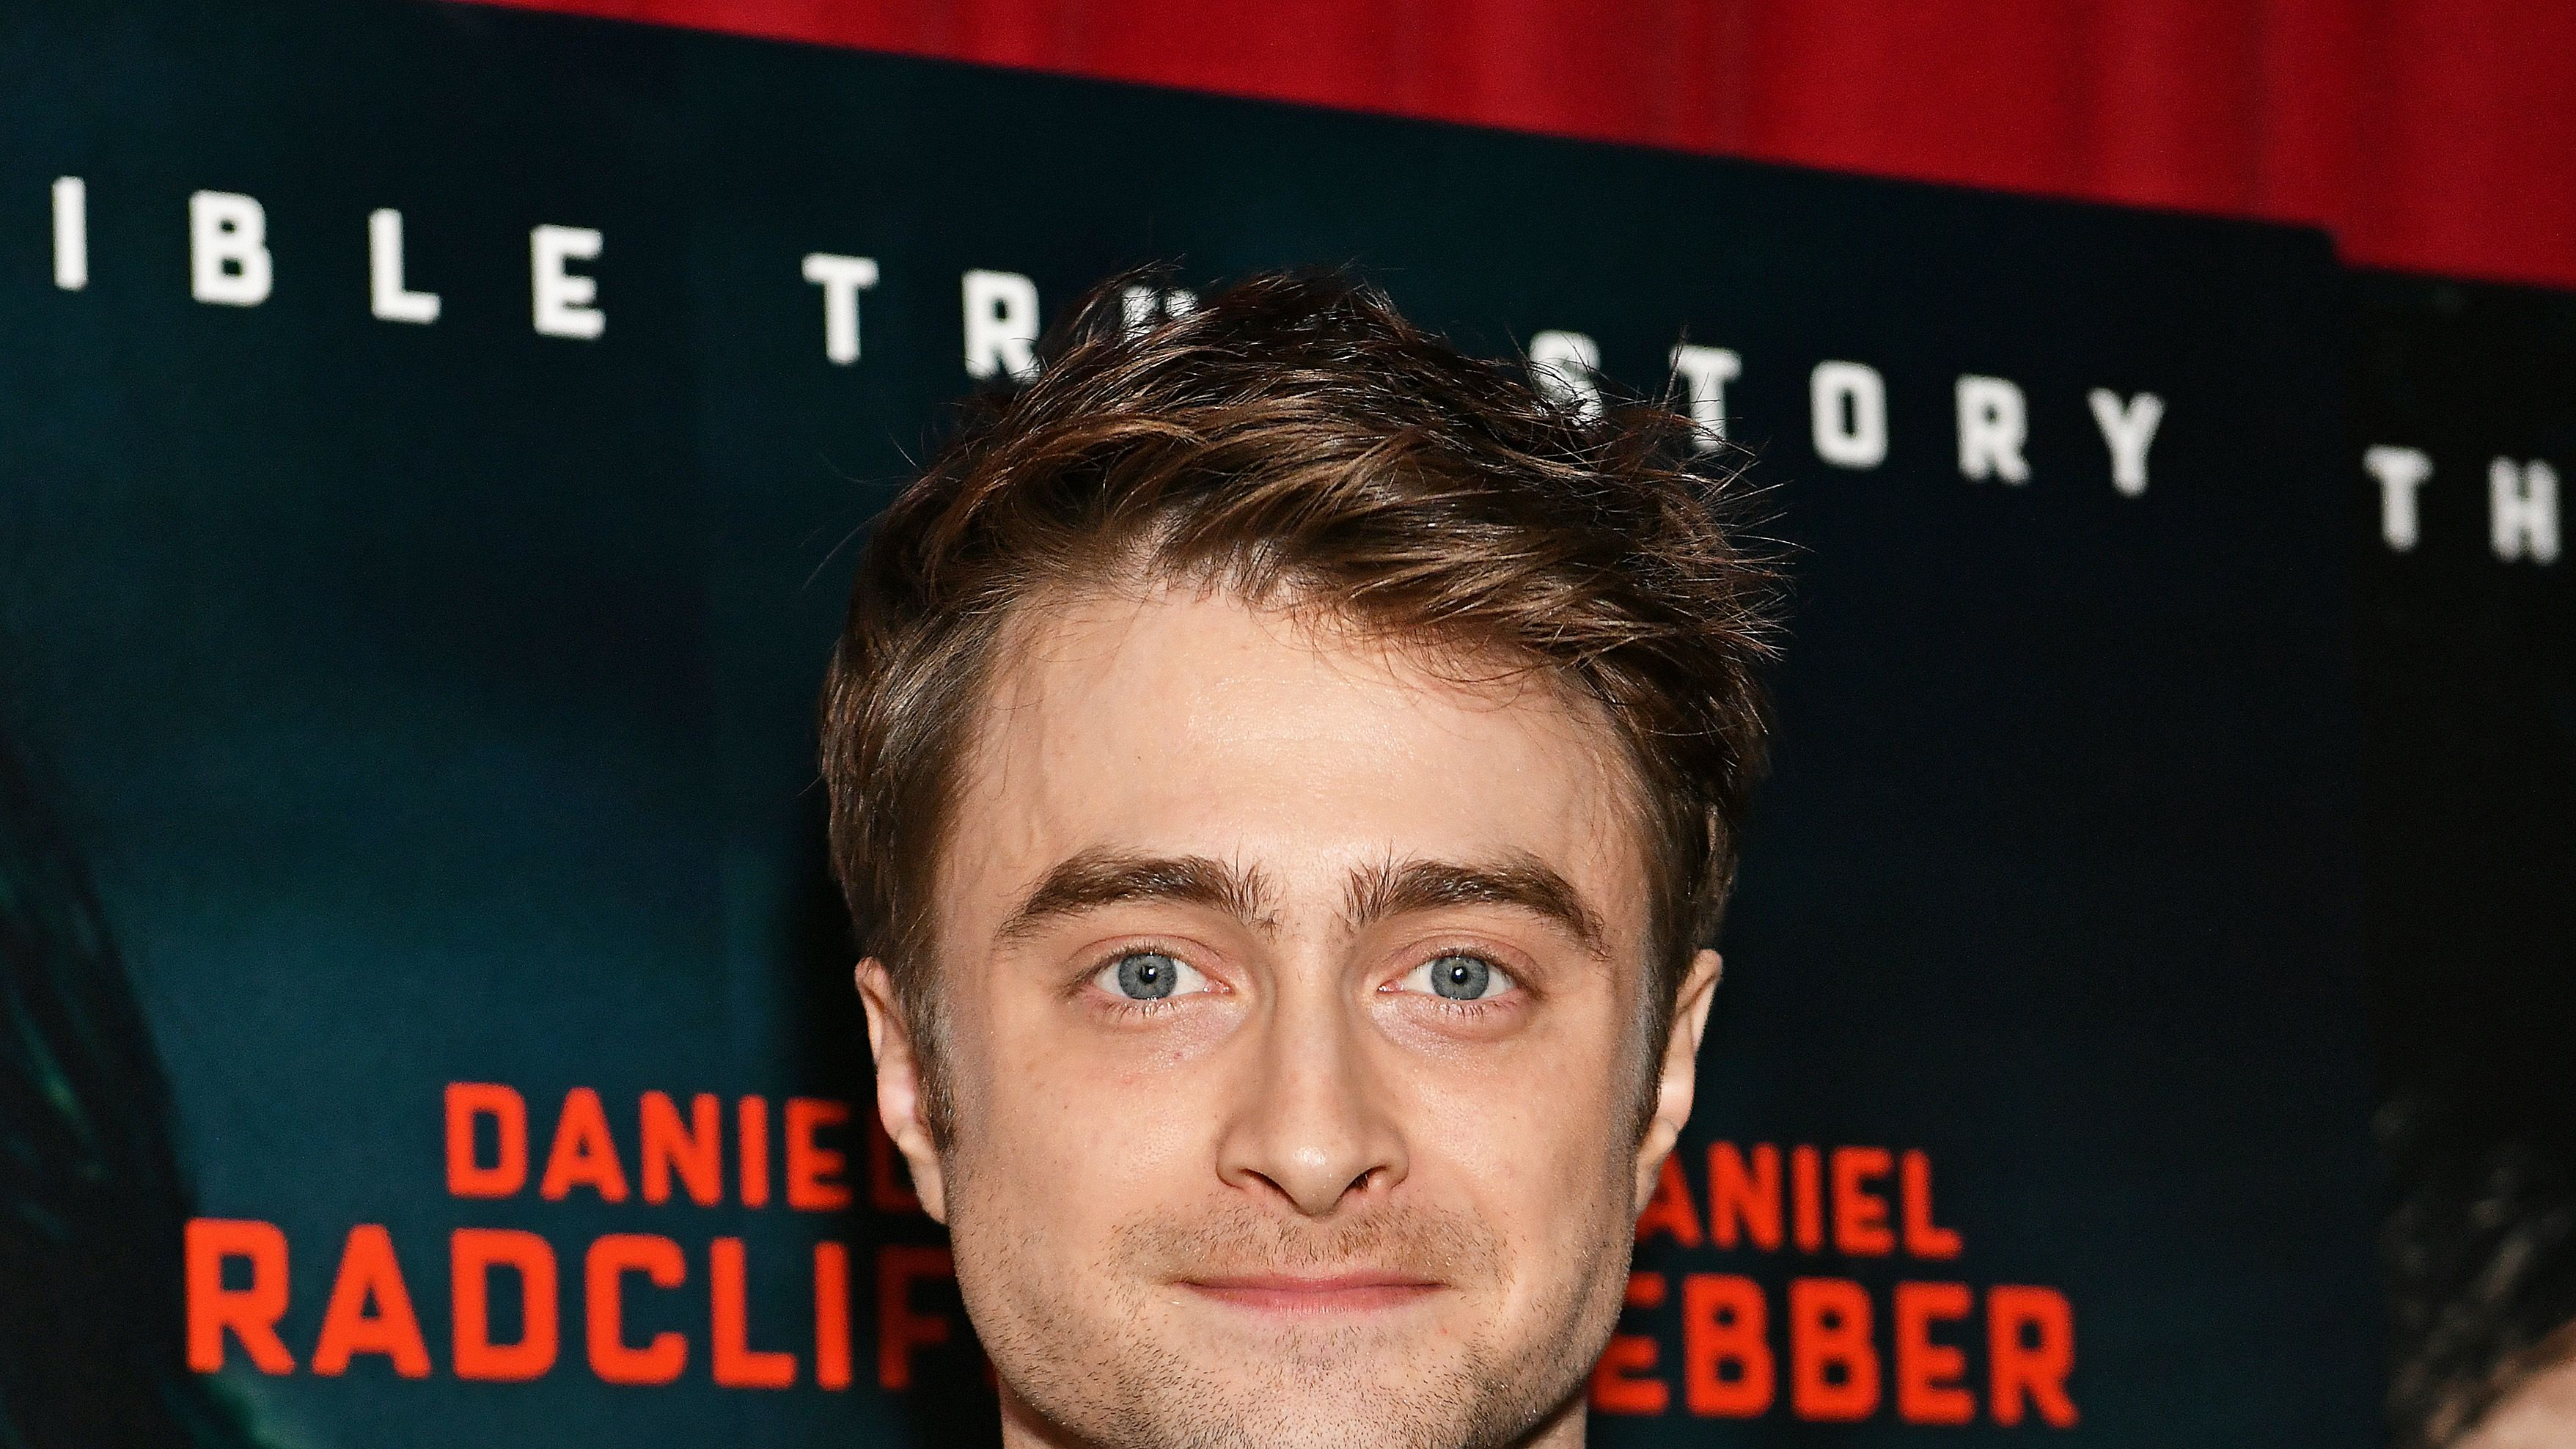 Daniel Radcliffe Fun Facts and Things You Didn't Know